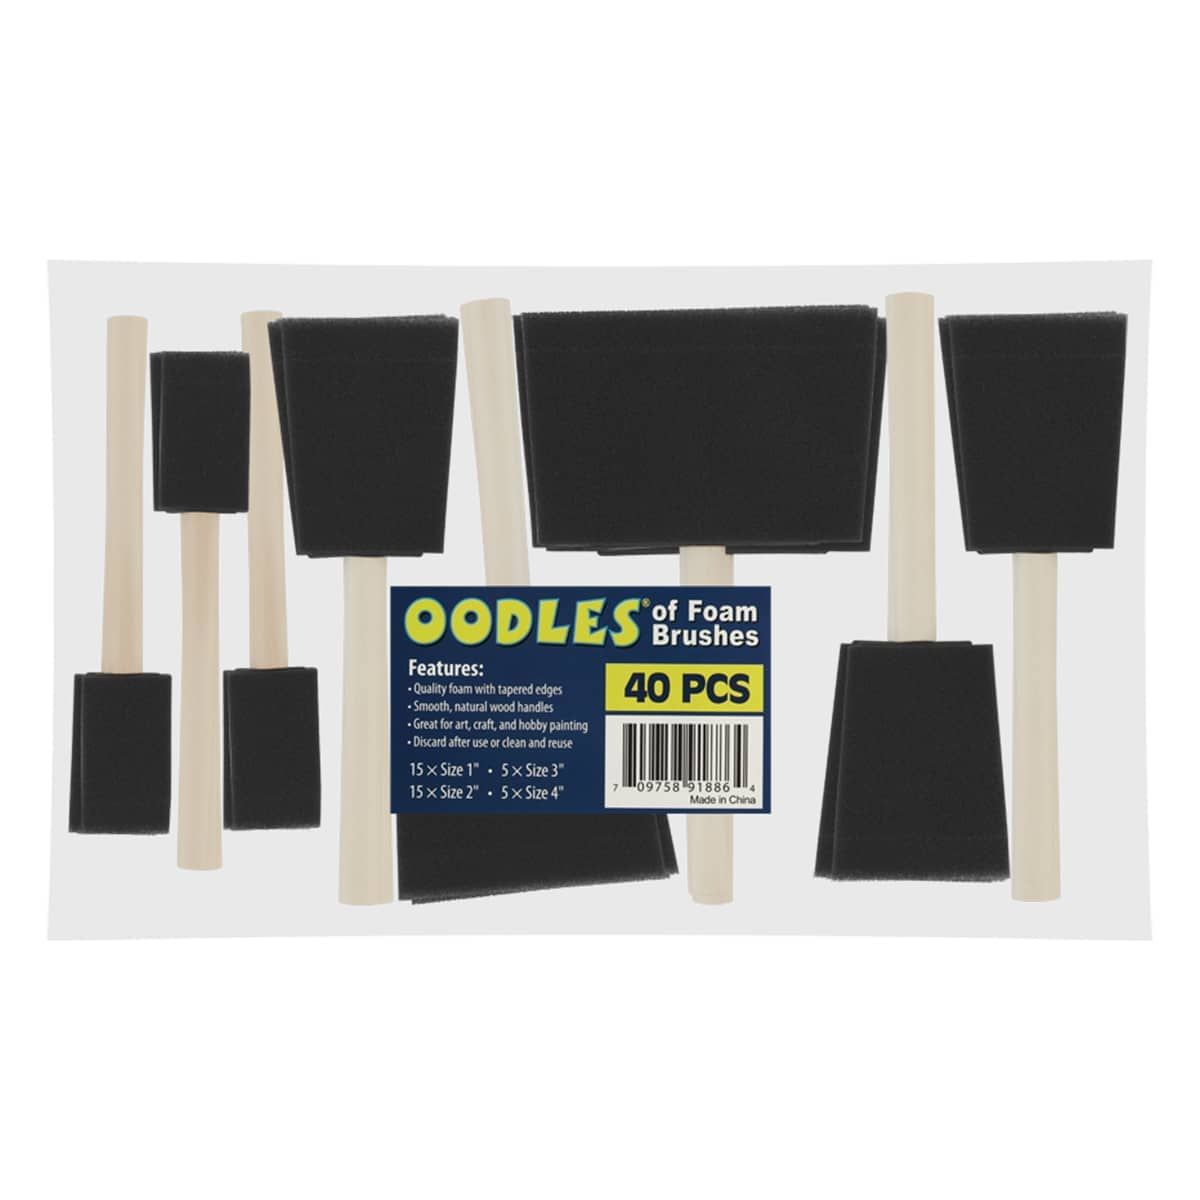 Oodles of Foam Brush assorted pack of 40 foam brushes